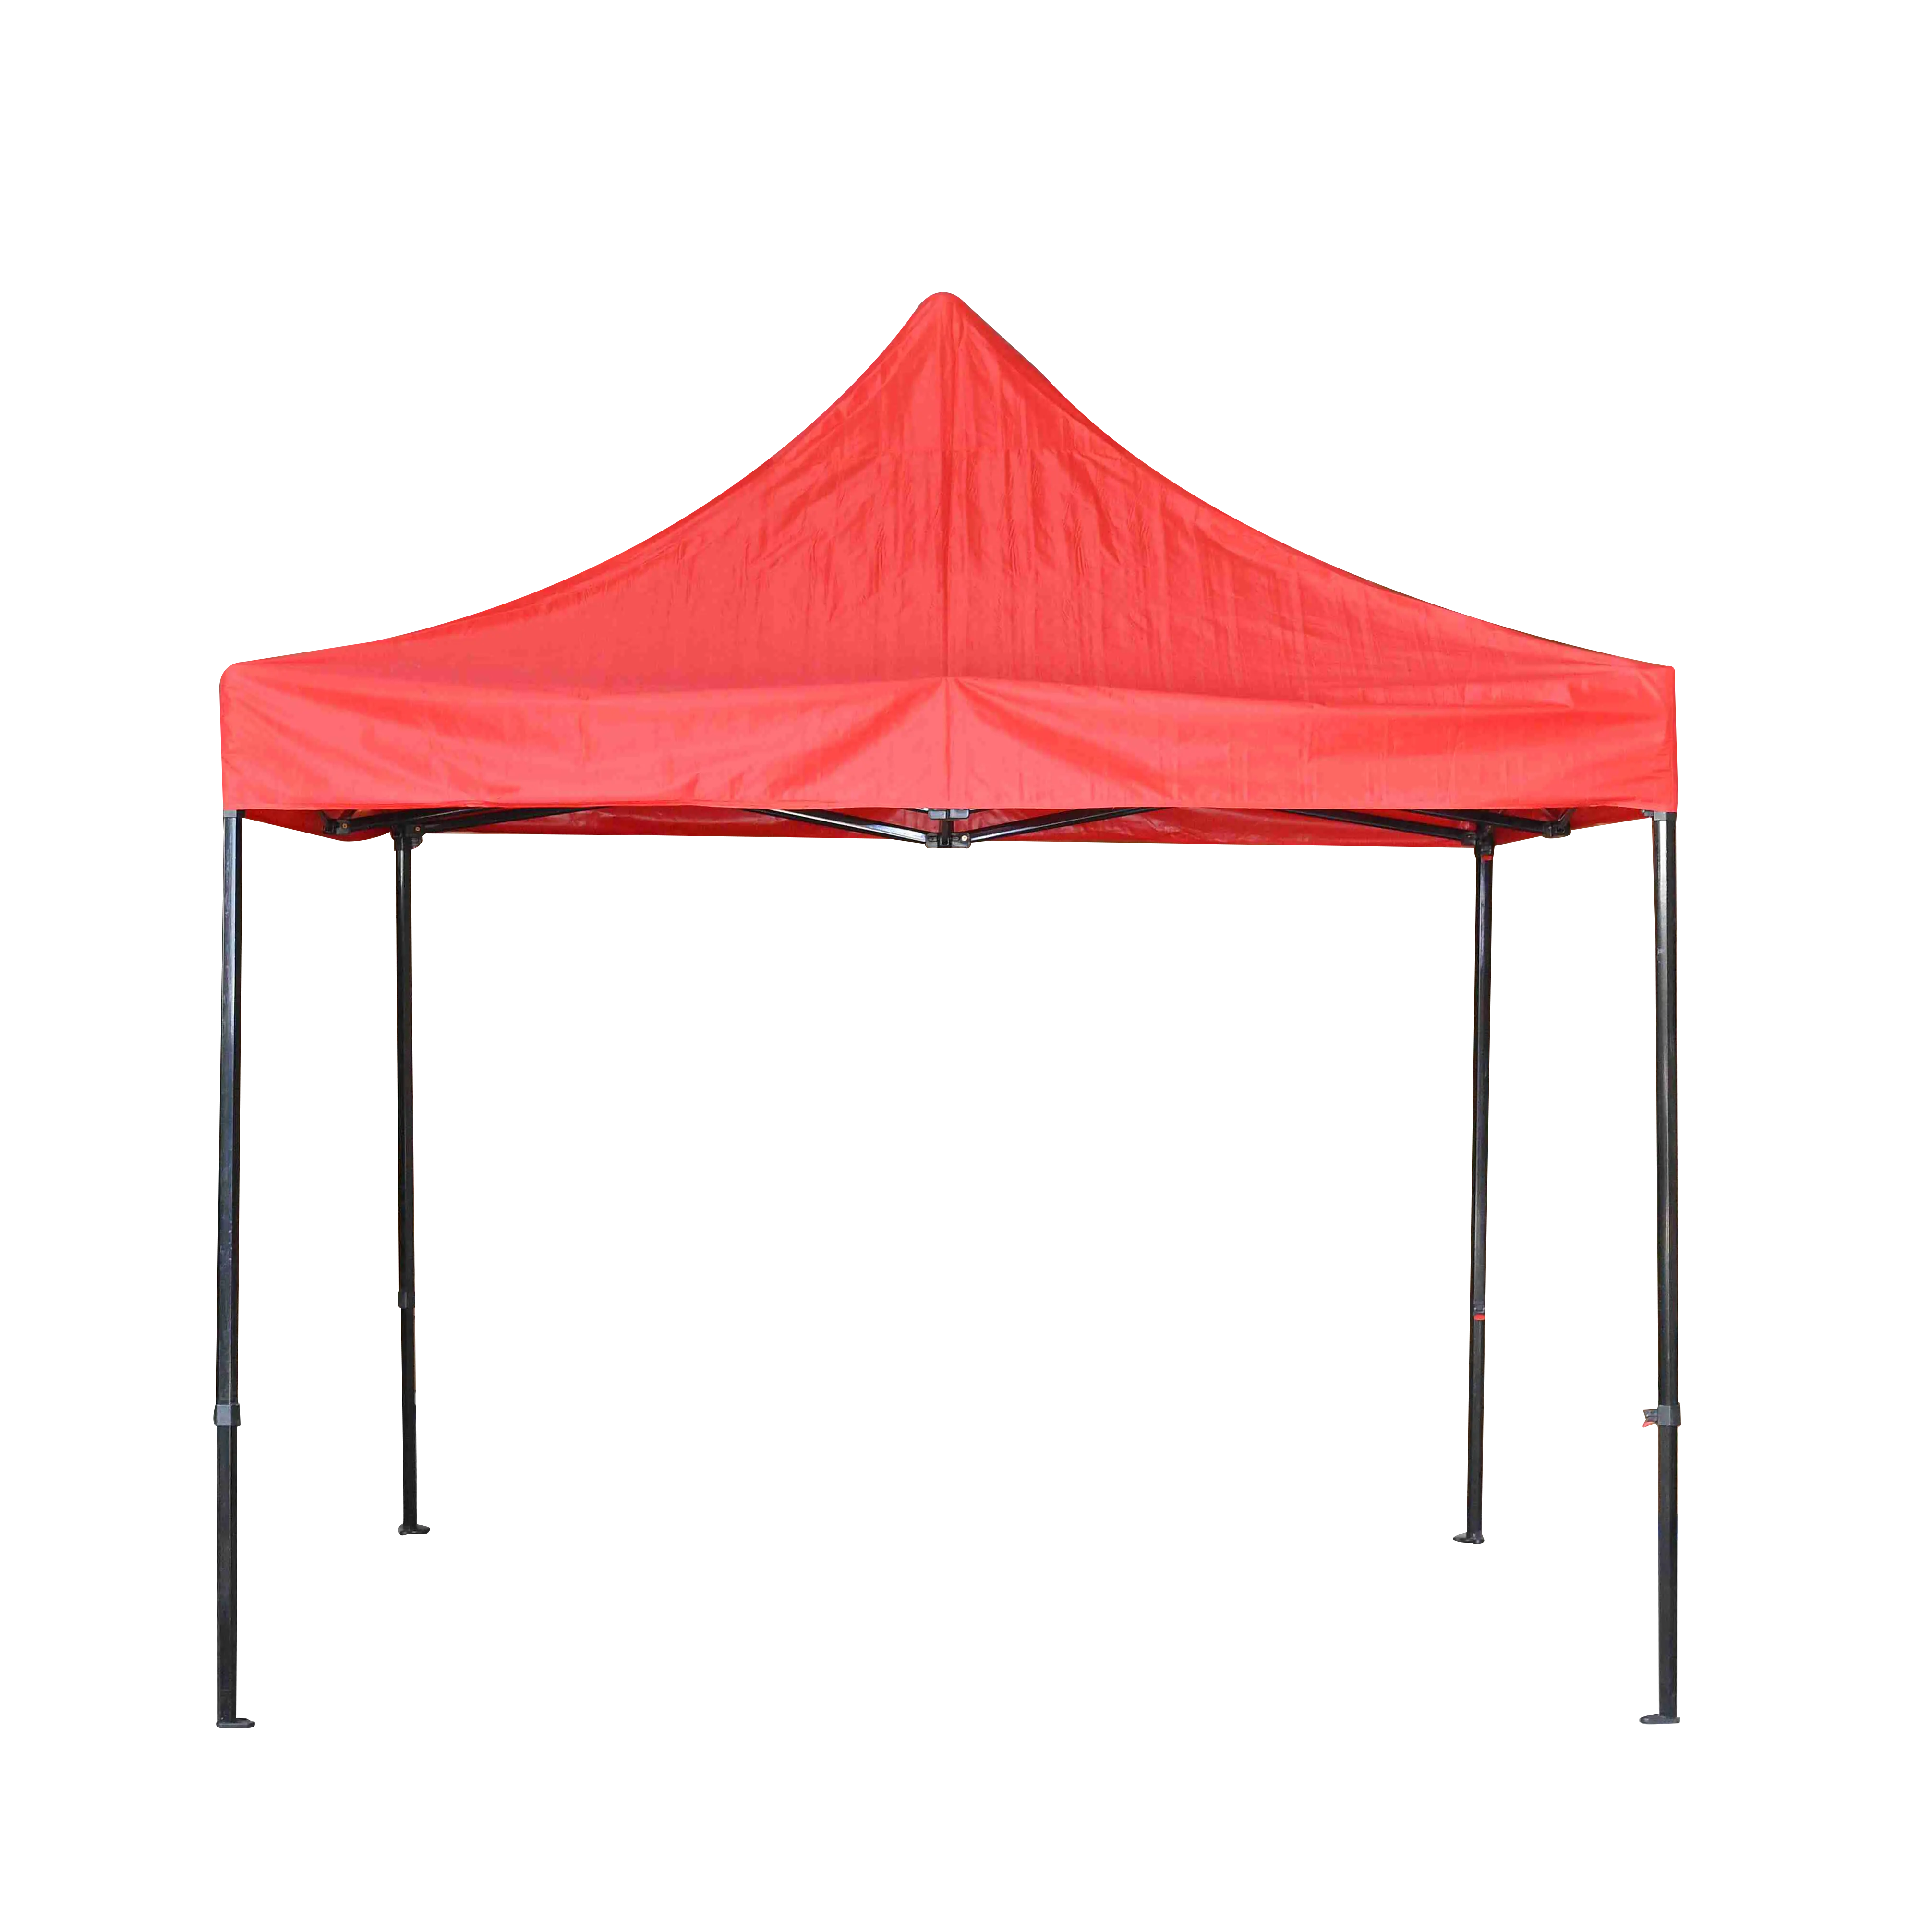 Outdoor Trade Show Folding Instant Easy Up Pop Up Awning Marquee Gazebo Party Metal Tent Frame Black Patio Gazebo Tent